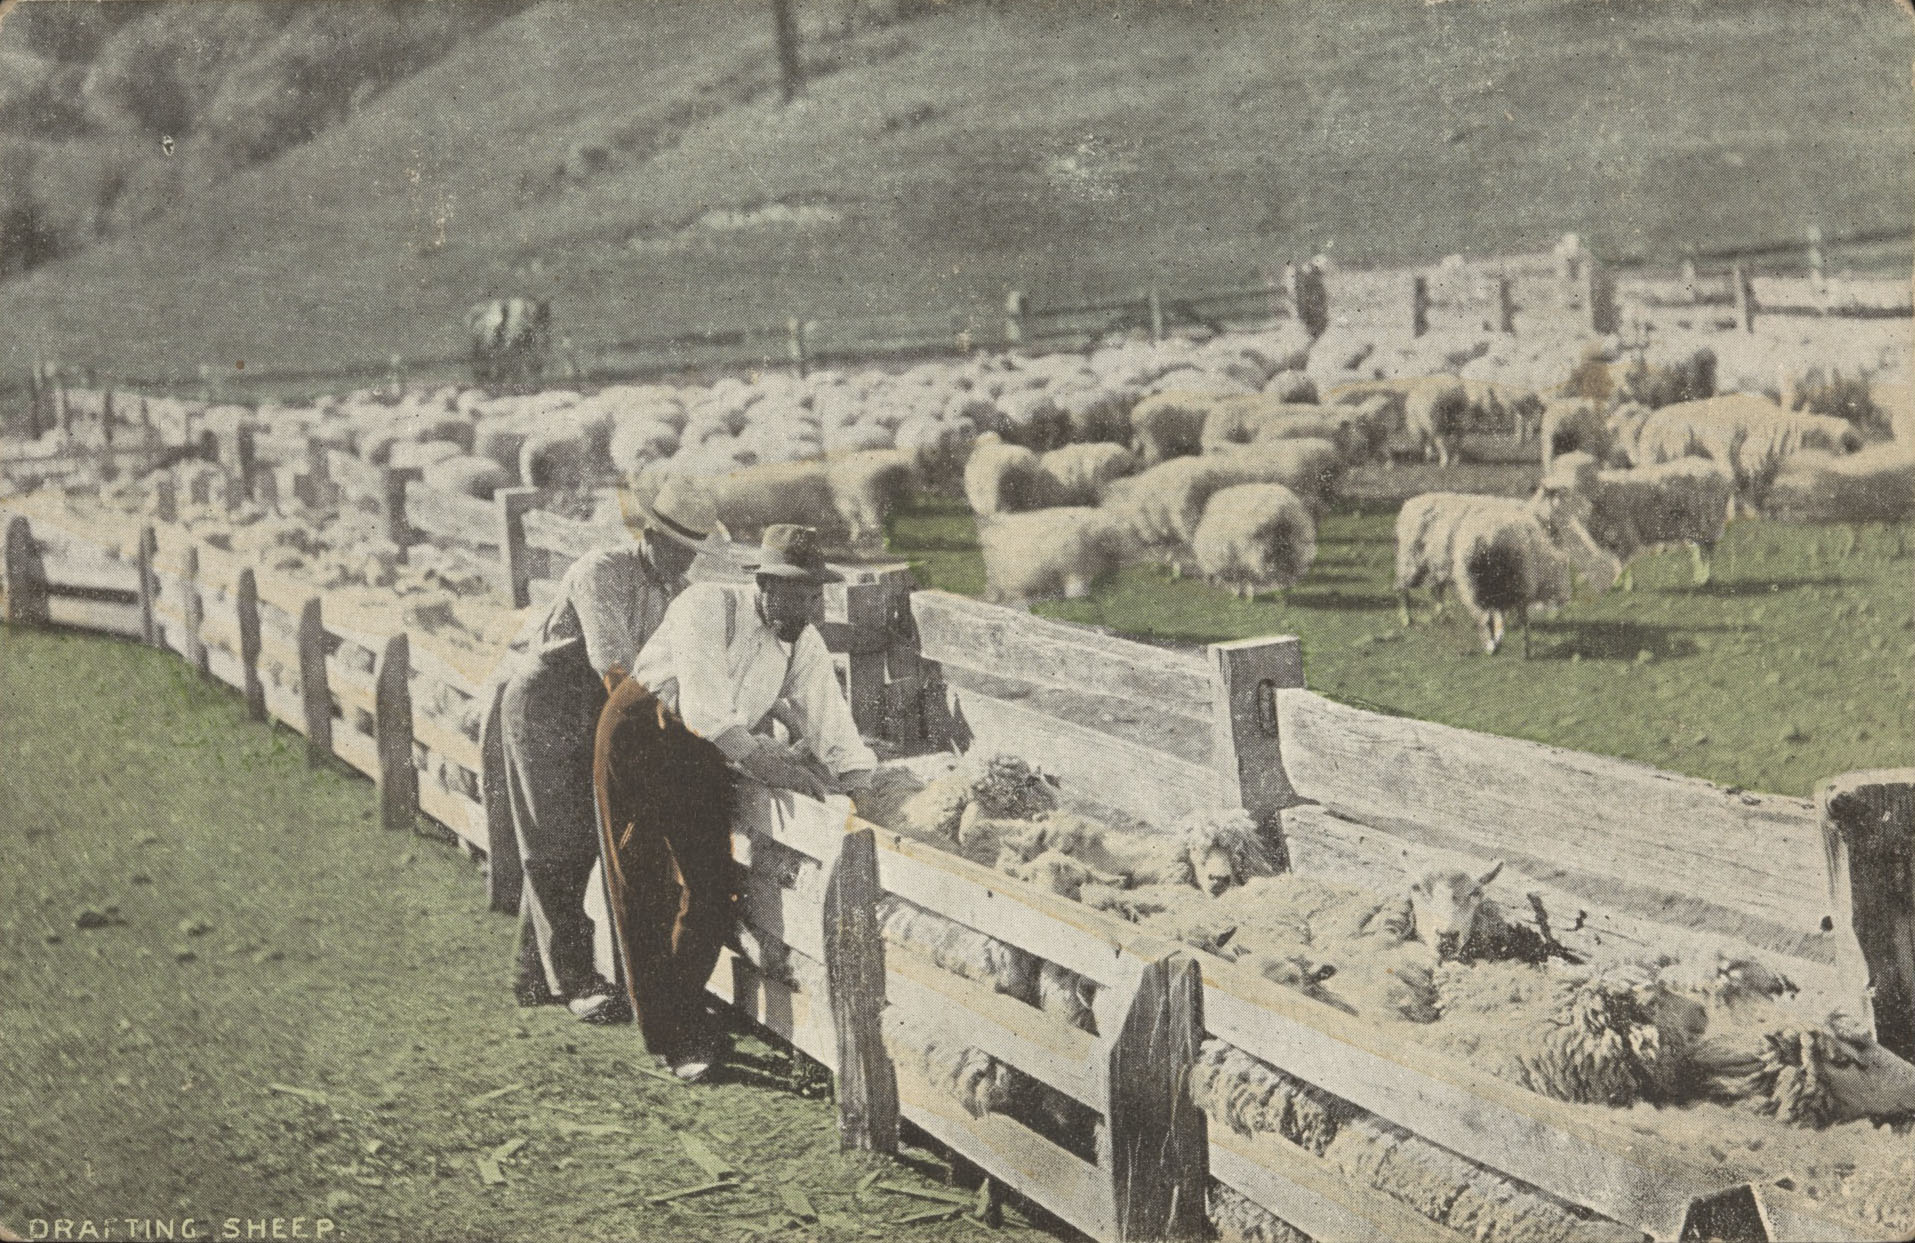 Postcard with a photograph of sheep being drafted. 